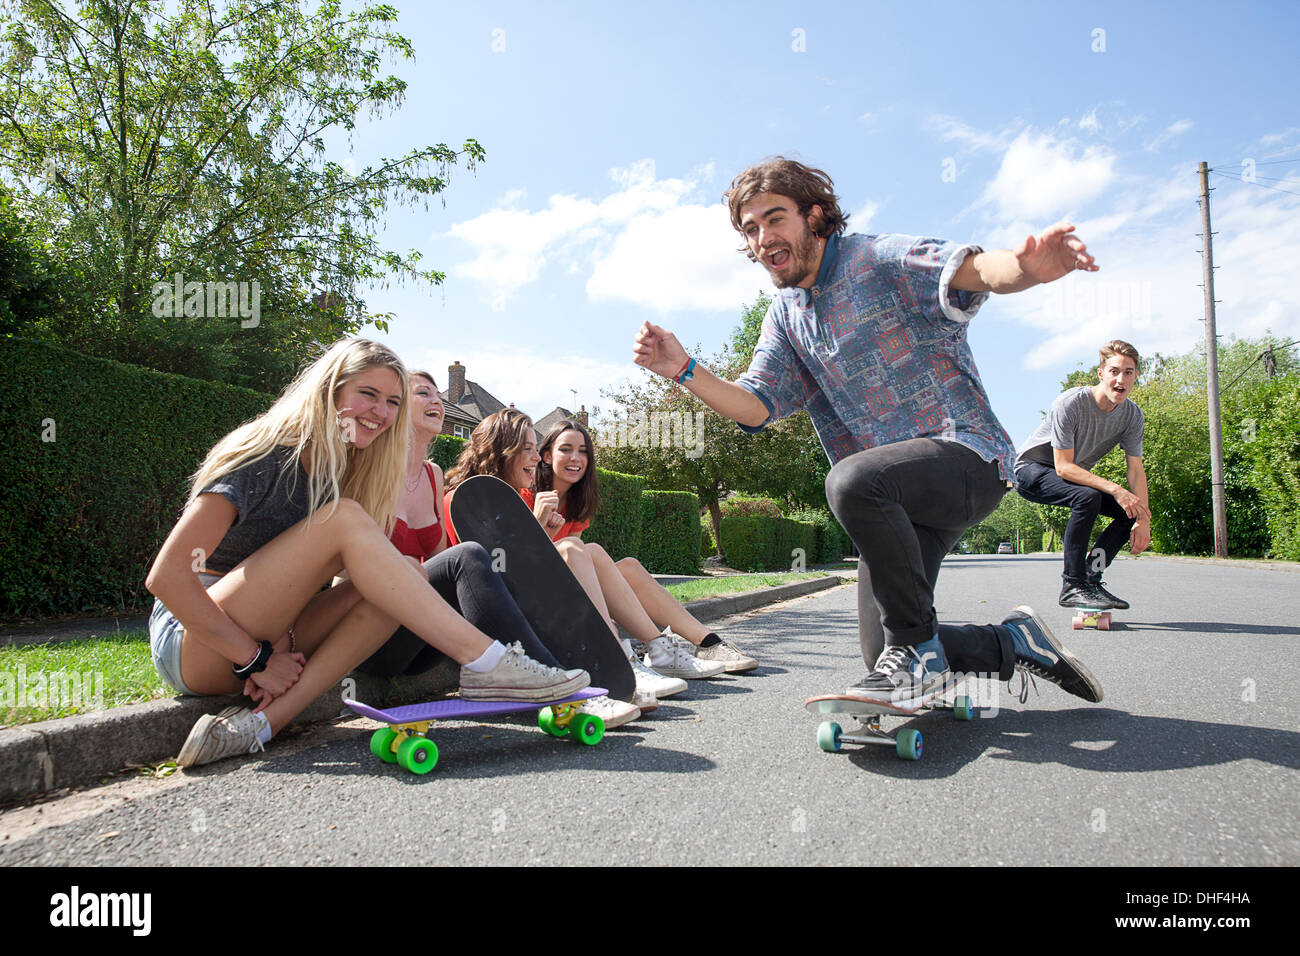 Four young women sitting on kerb watching skateboarders Stock Photo